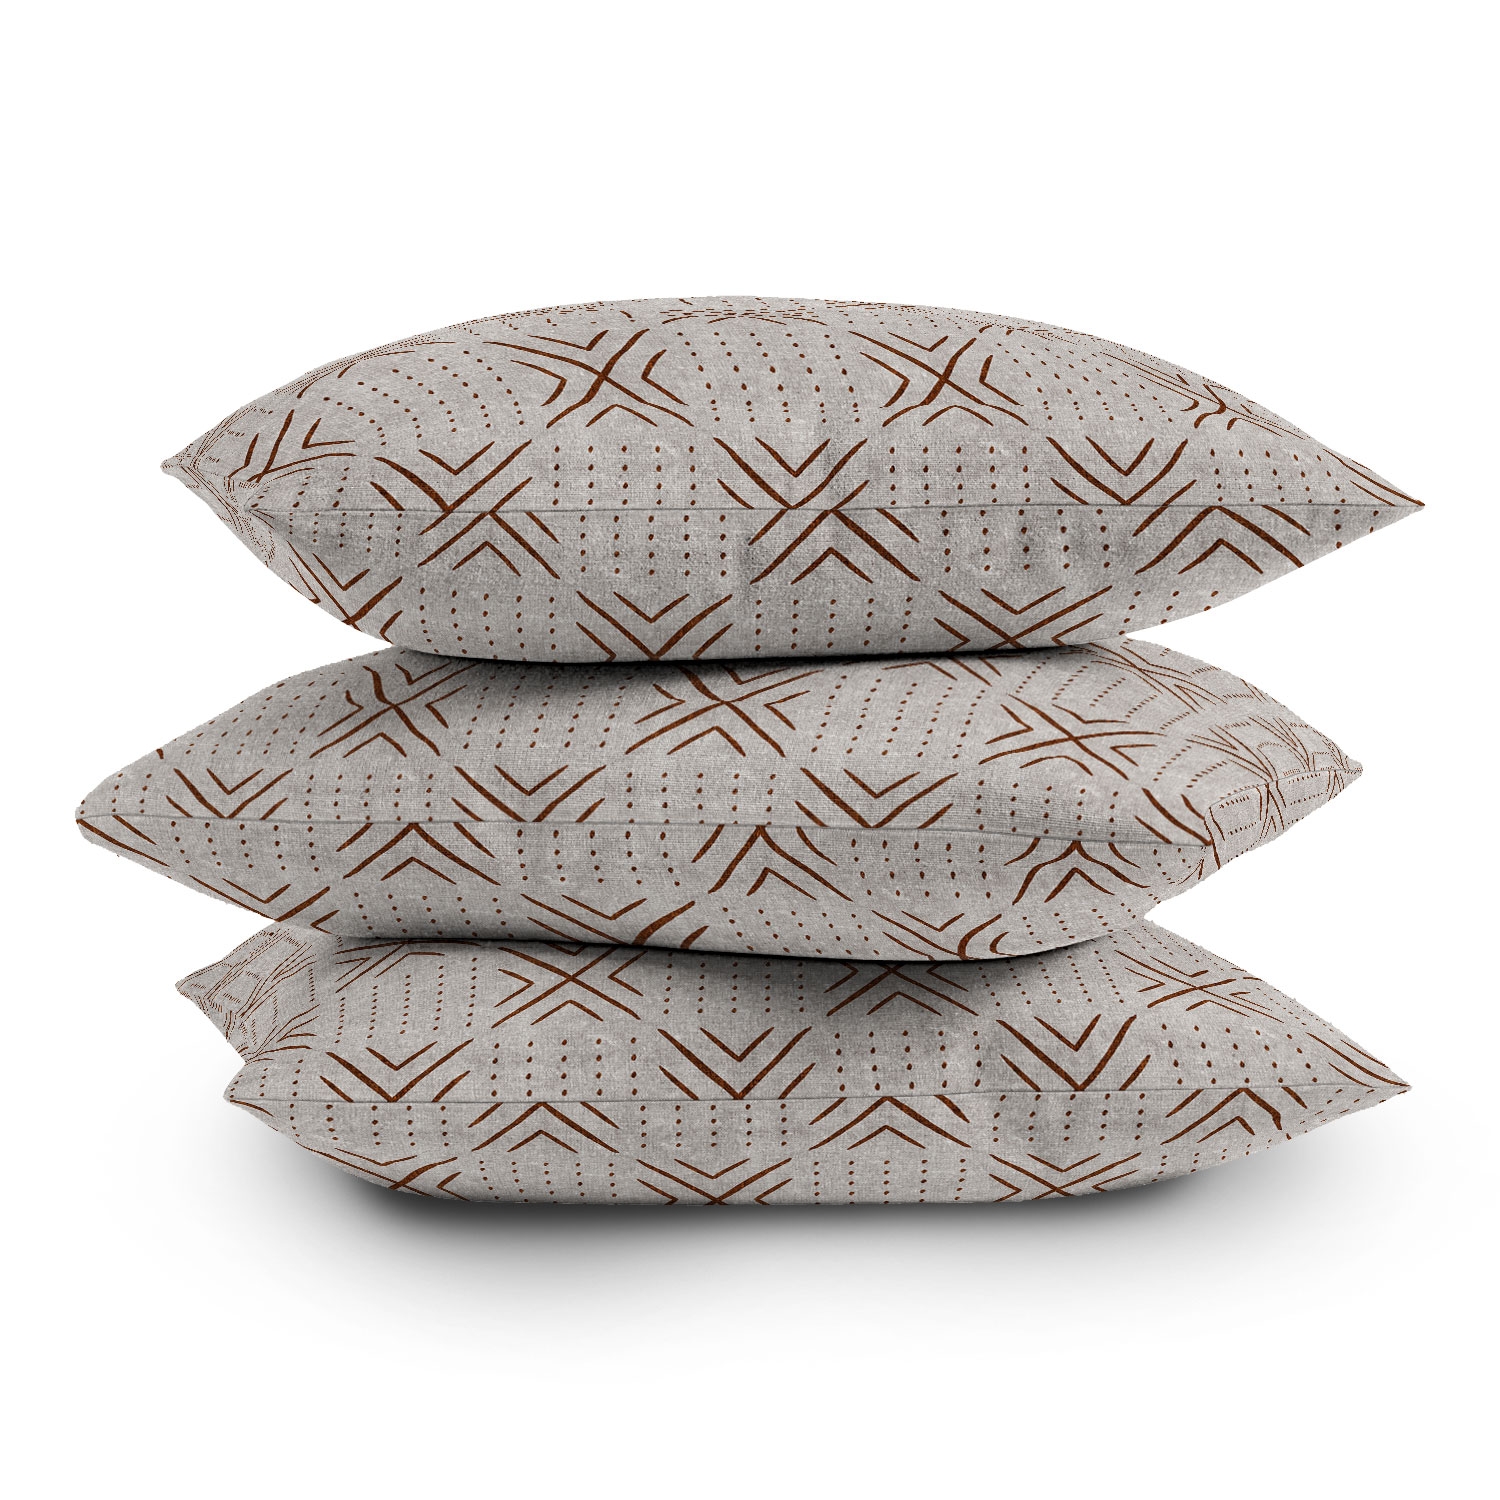 Mud Cloth Tile Stone Rust by Little Arrow Design Co - Outdoor Throw Pillow, 20" x 20" - Image 3